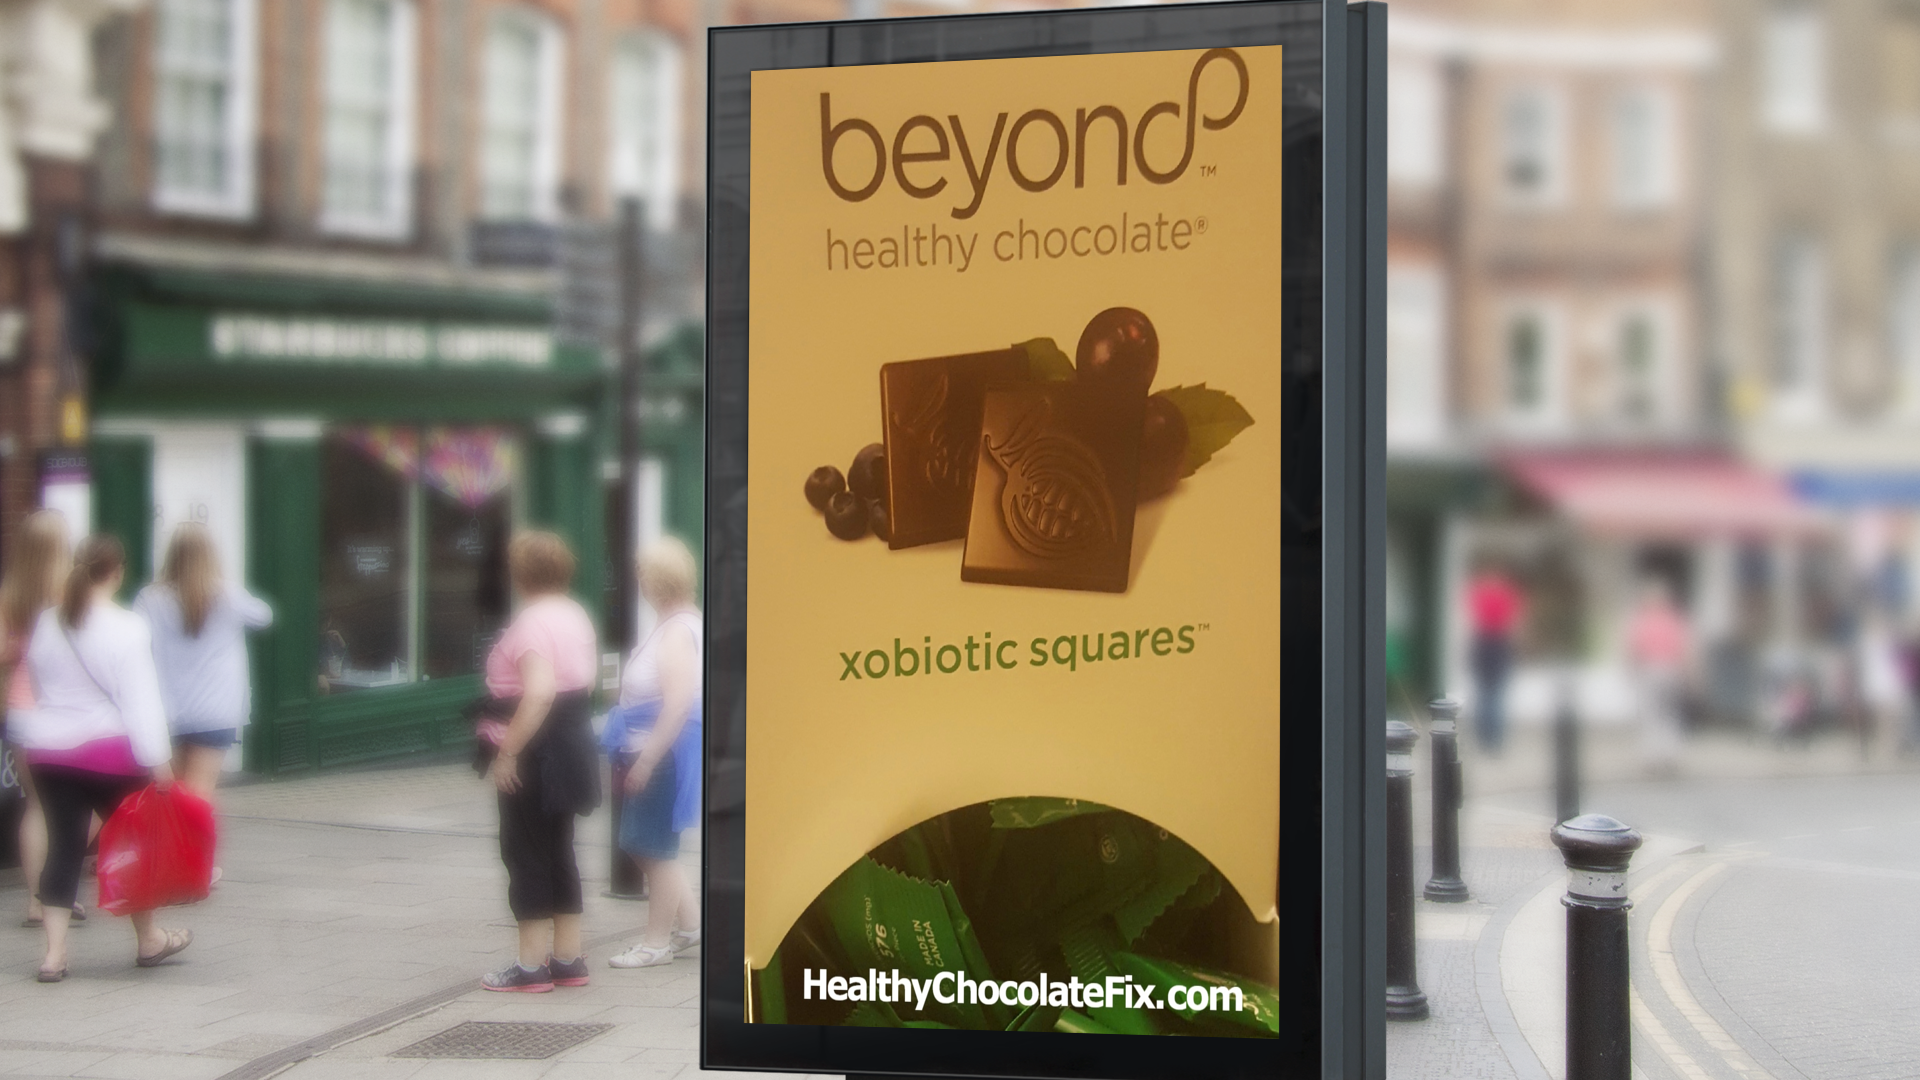 Is The Best Price for Beyond (Xocai) Healthy Chocolate on Amazon?